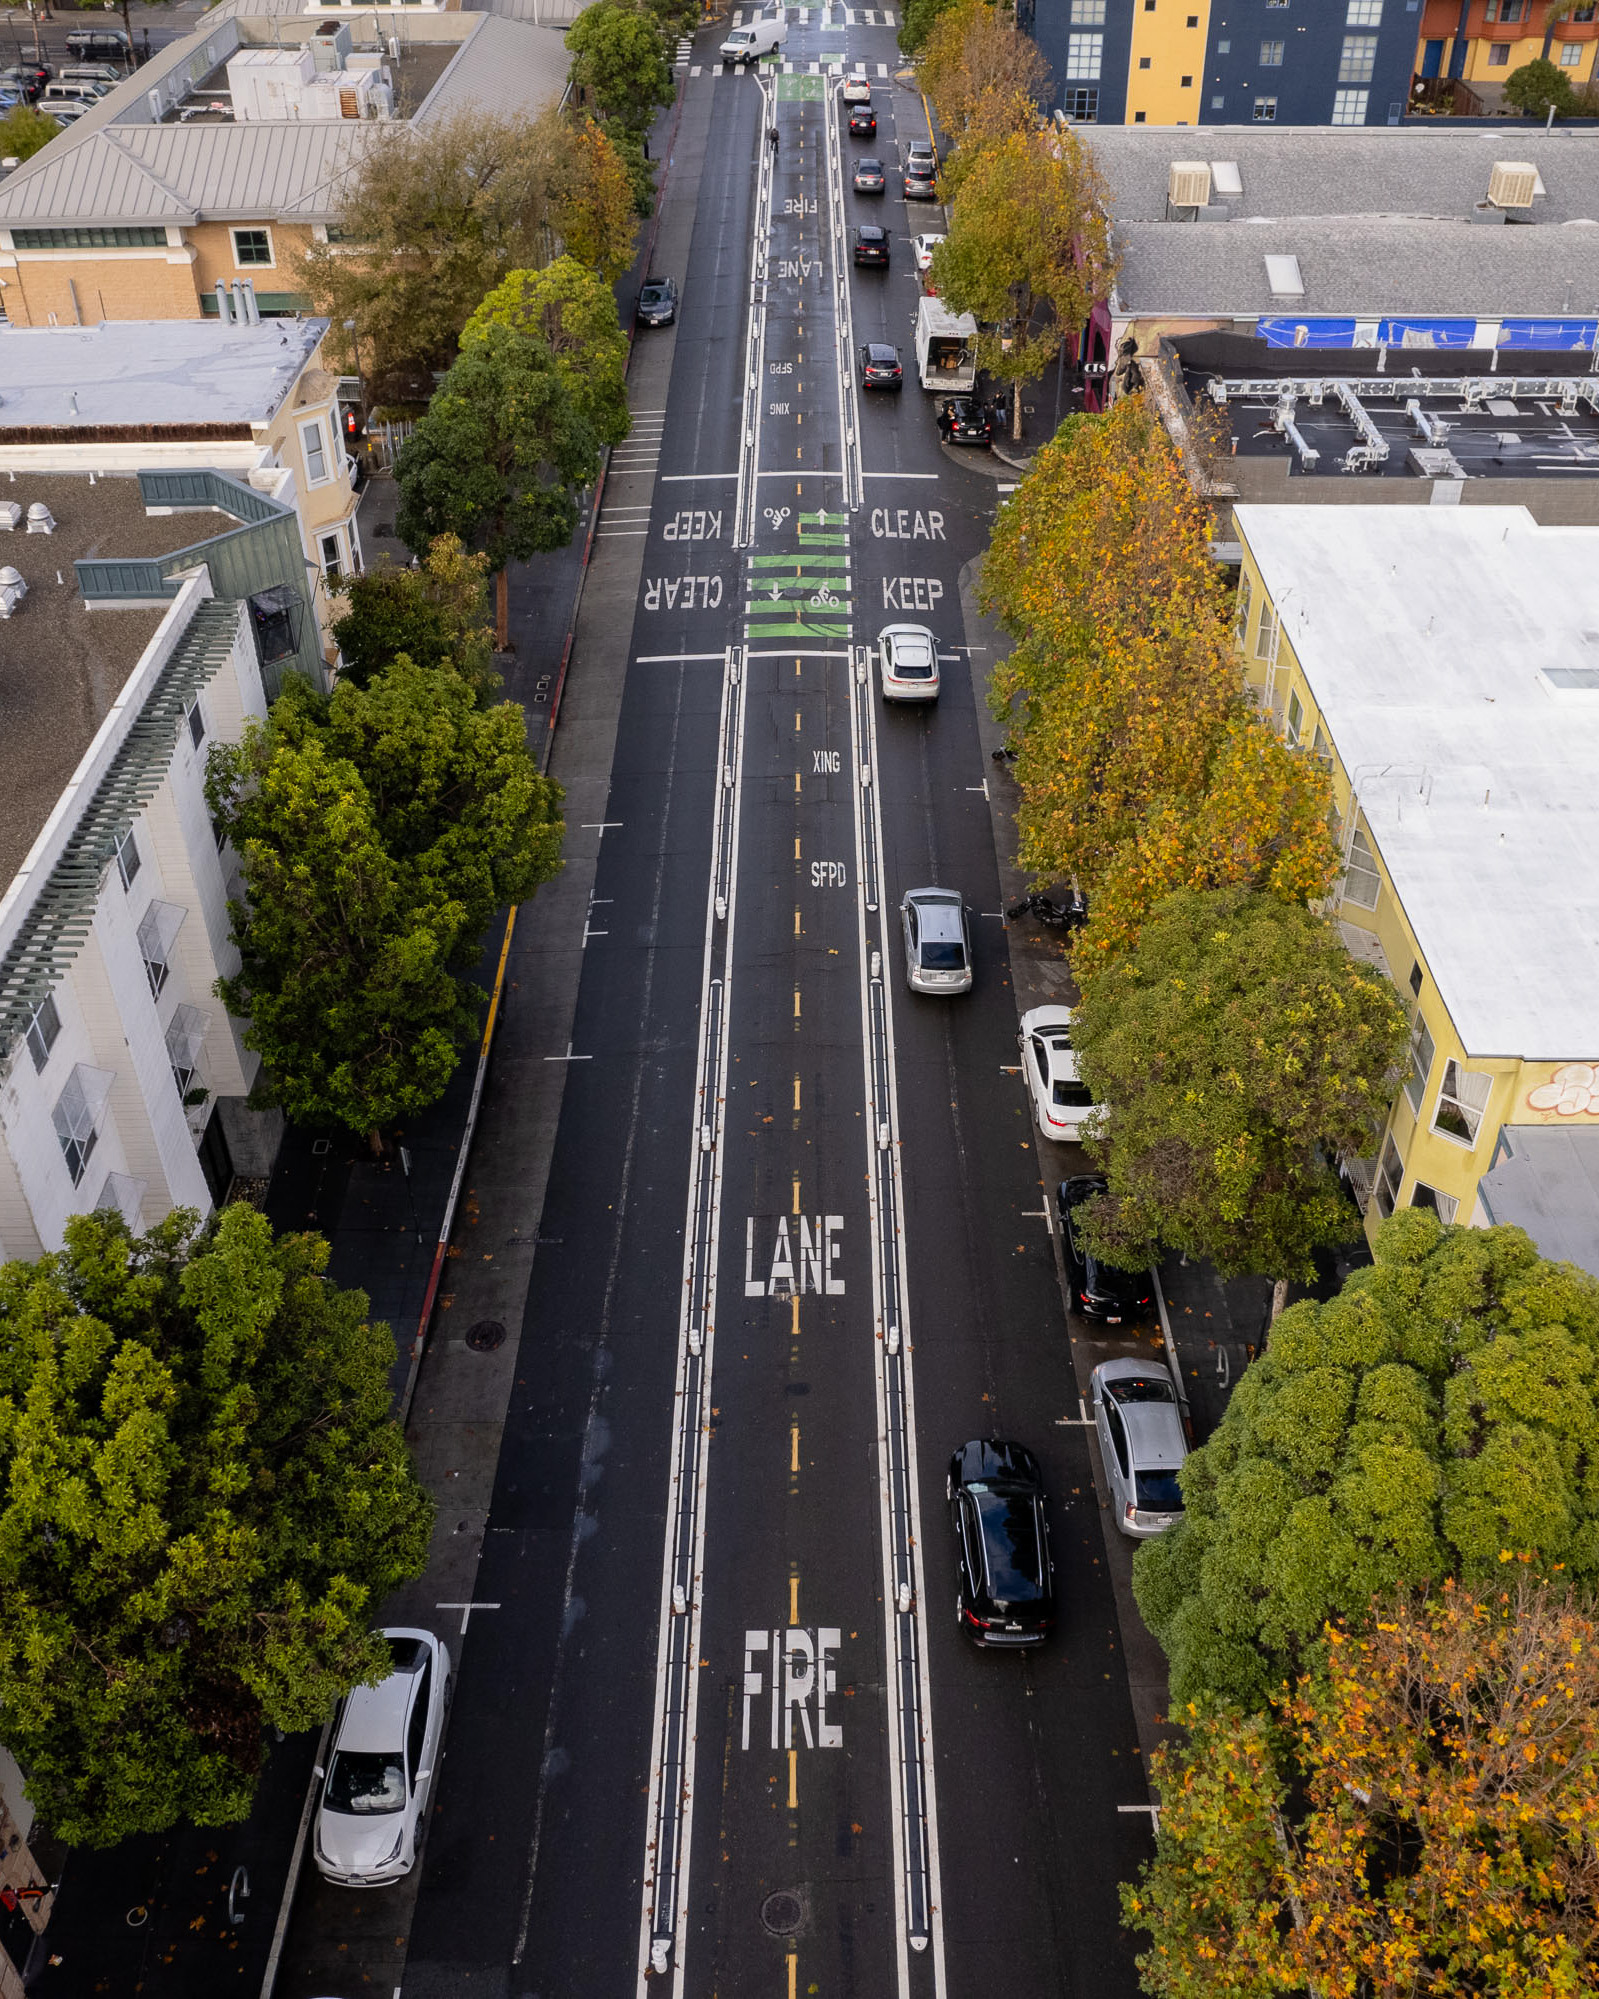 An aerial view of a street lined with trees and buildings shows a &quot;FIRE LANE&quot; with clear &quot;KEEP CLEAR&quot; markings, and cars parked on both sides.